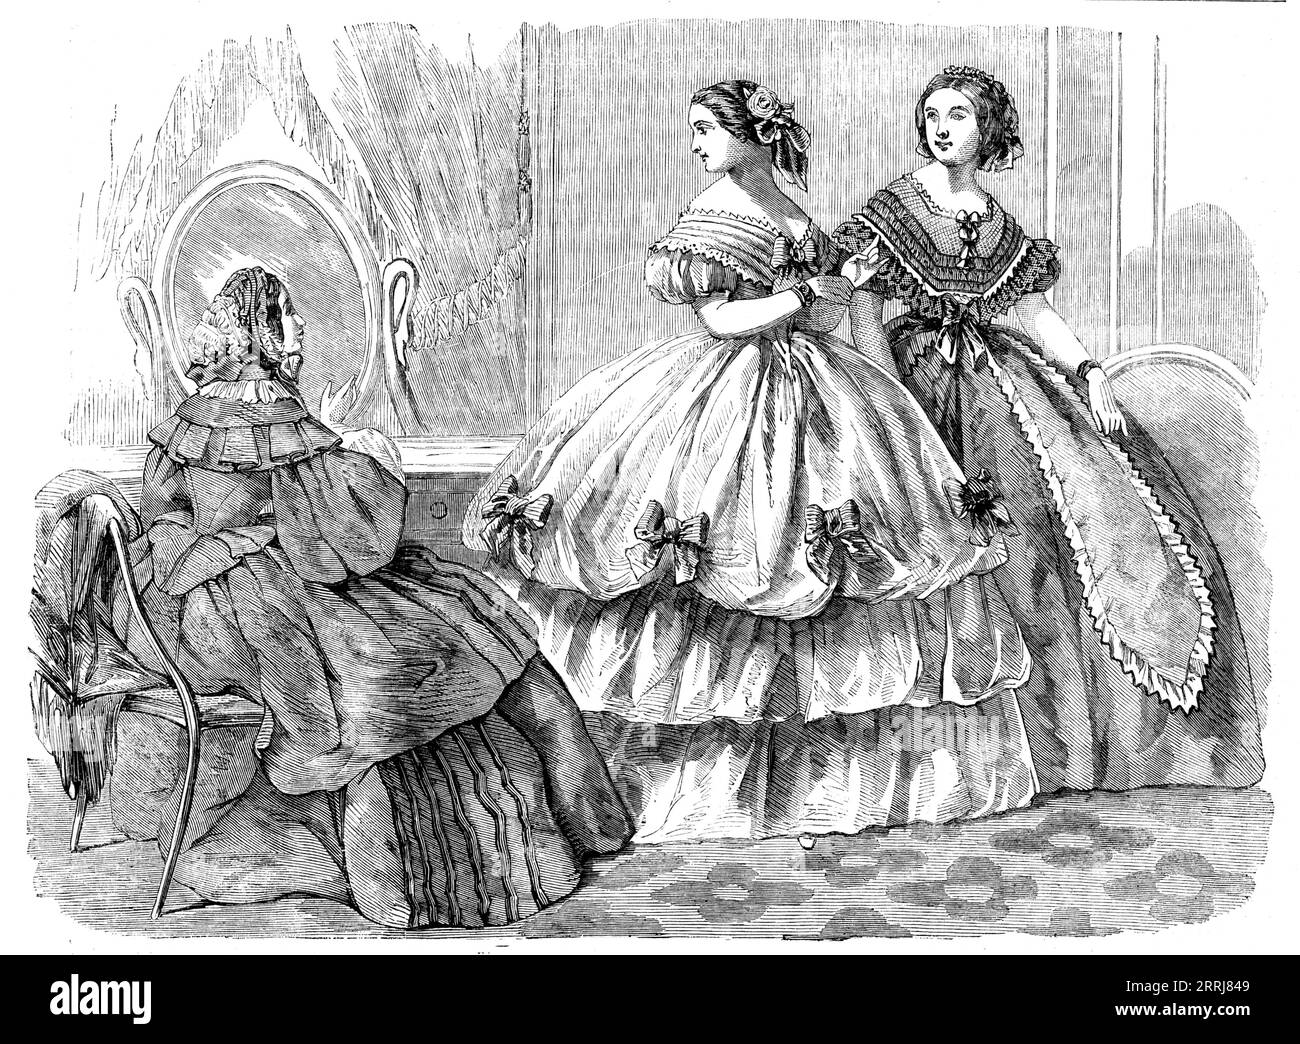 Fashions for December, 1858. 'Dress of green droguet, spotted with black velvet. The dress has two skirts and both have side trimmings, formed of rows of black velvet...The corsage, which fits closely to the figure, is pointed at the waist...The sleeves are wide, slit open at the inner part of the arm, and set in large plaits at the shoulder. The under sleeves consist of large puffs of muslin...Bonnet of grey terry, trimmed with groseille-coloured velvet...Ball Costume: Robe of white tarletane, with two flounces...Over the flounced robe is a tunic...gathered up at intervals in festoons, fixed Stock Photo